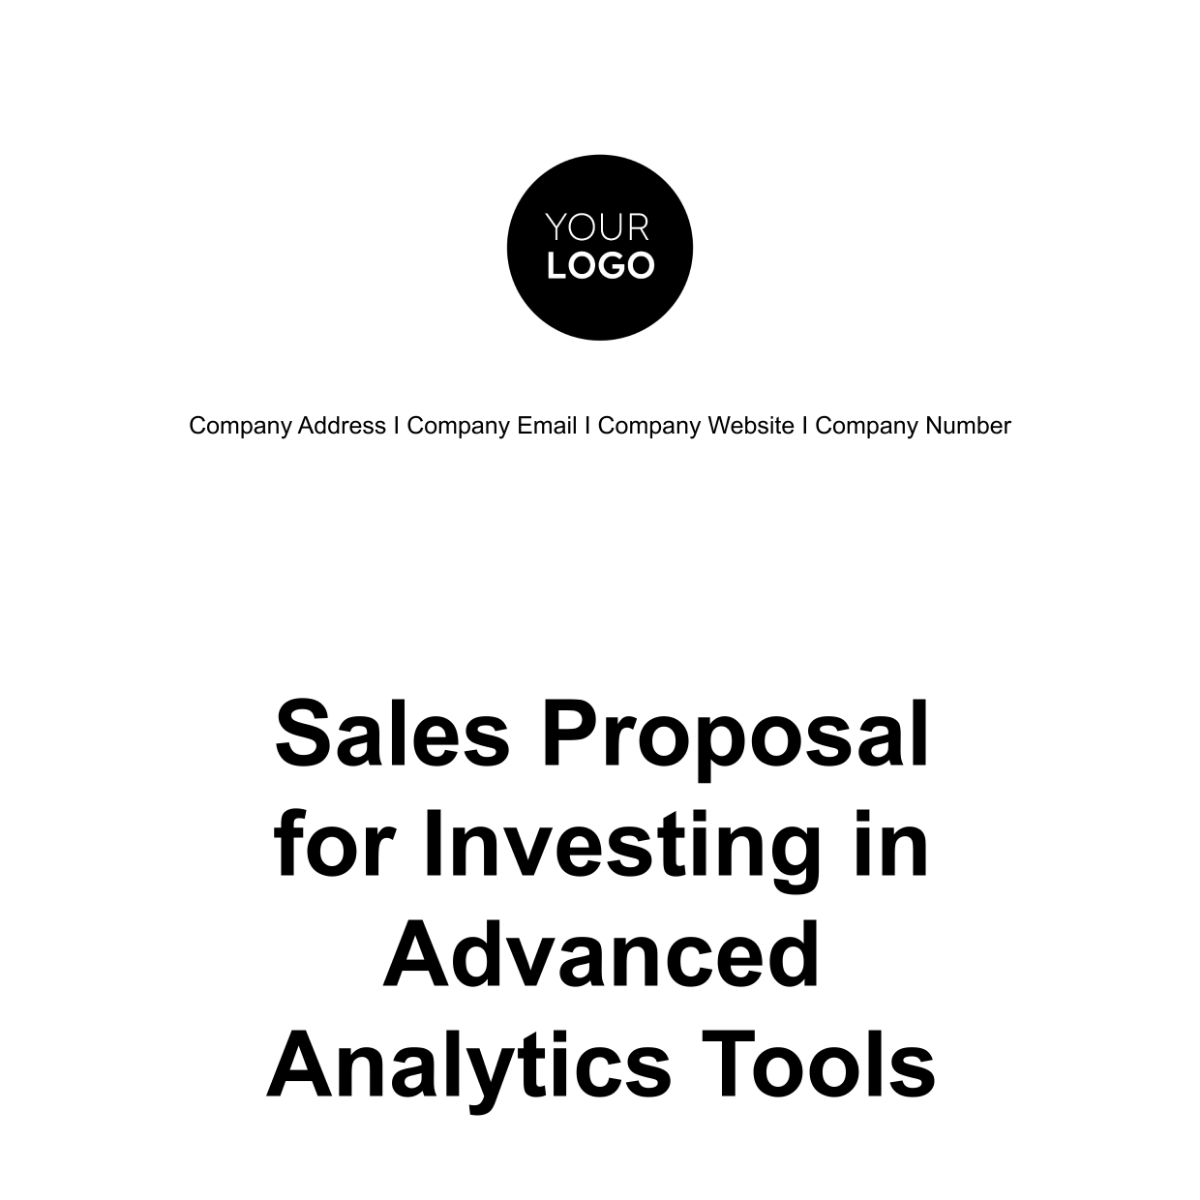 Free Sales Proposal for Investing in Advanced Analytics Tools Template